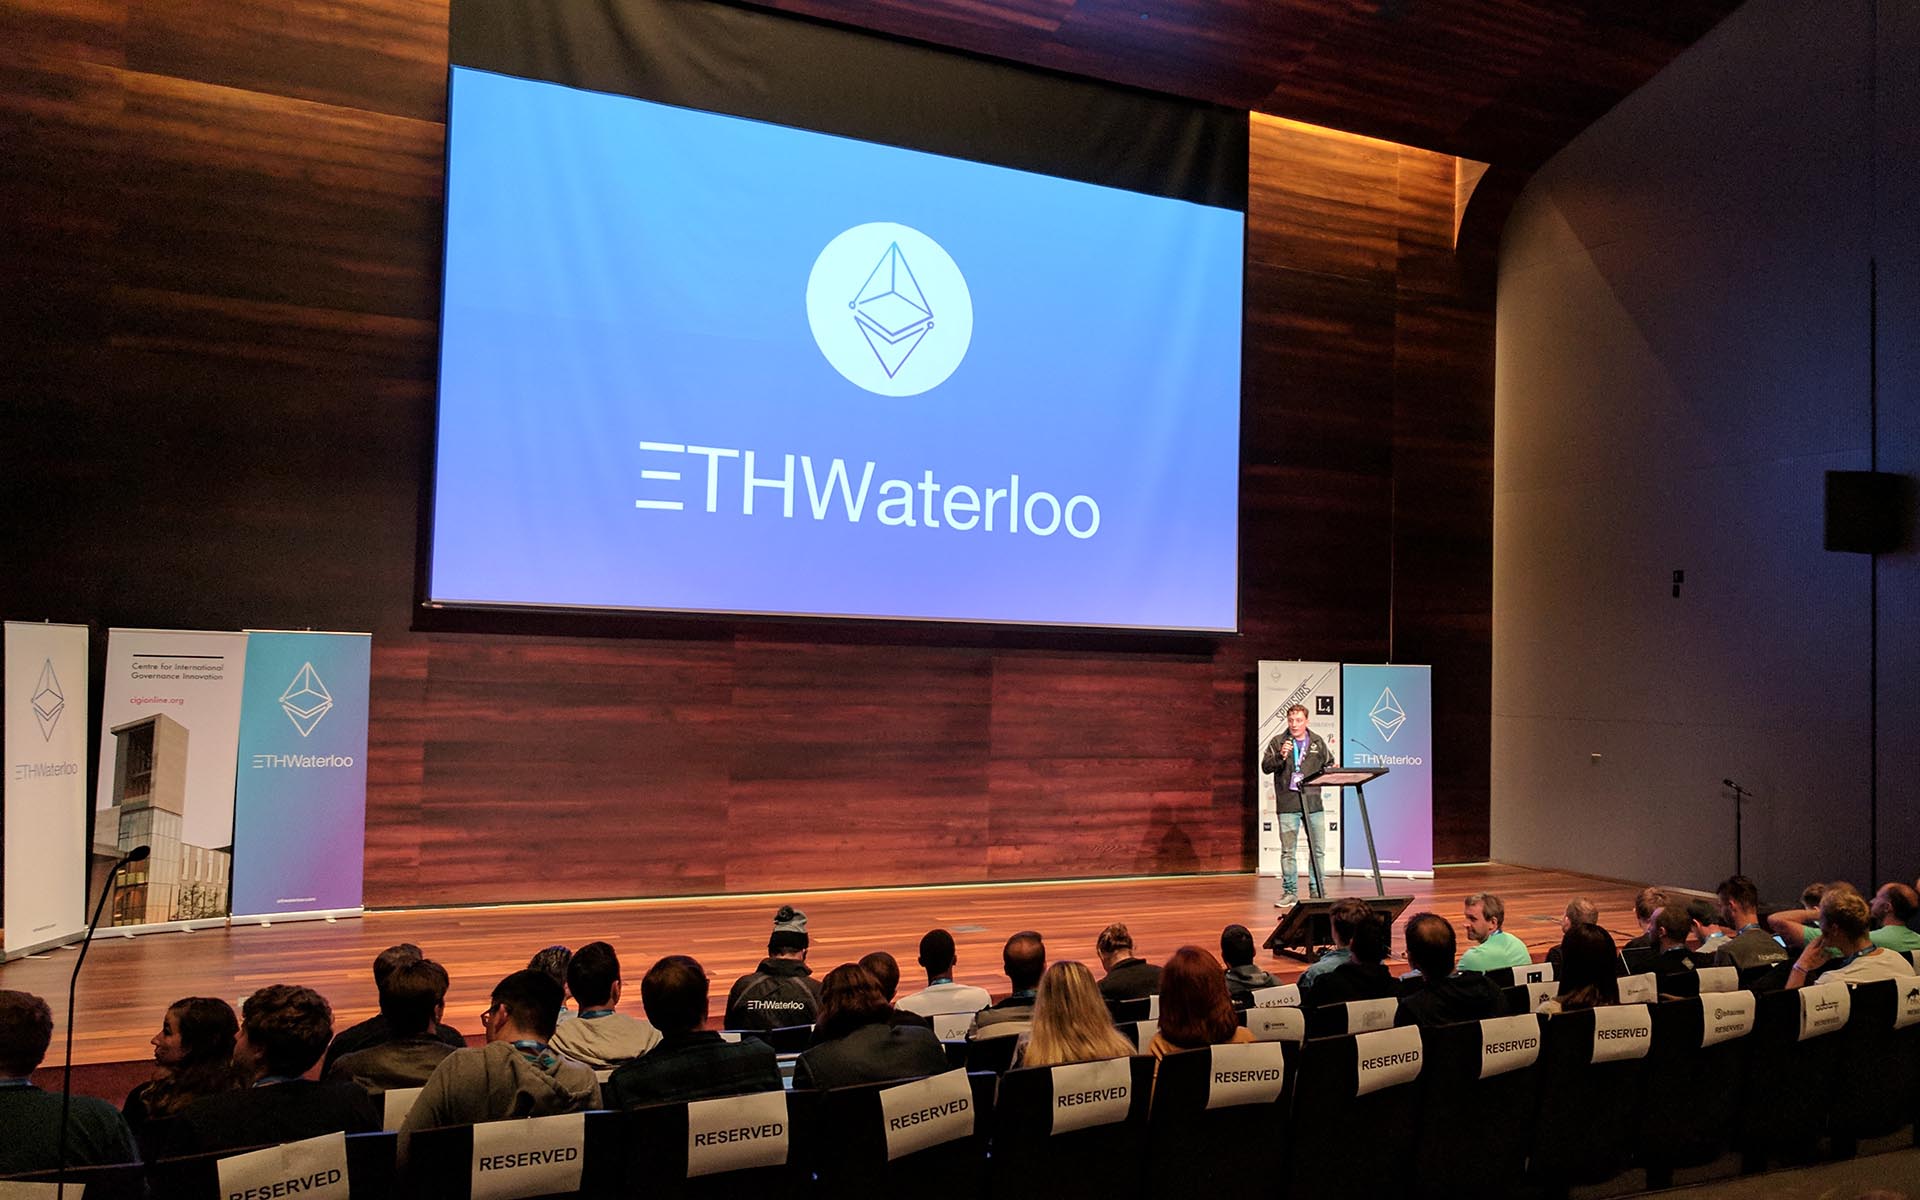 BANKEX Developed Plasma-like Protocol in 36 hours at World's Largest Ethereum Hackathon in Waterloo Mentored by Vitalik Buterin